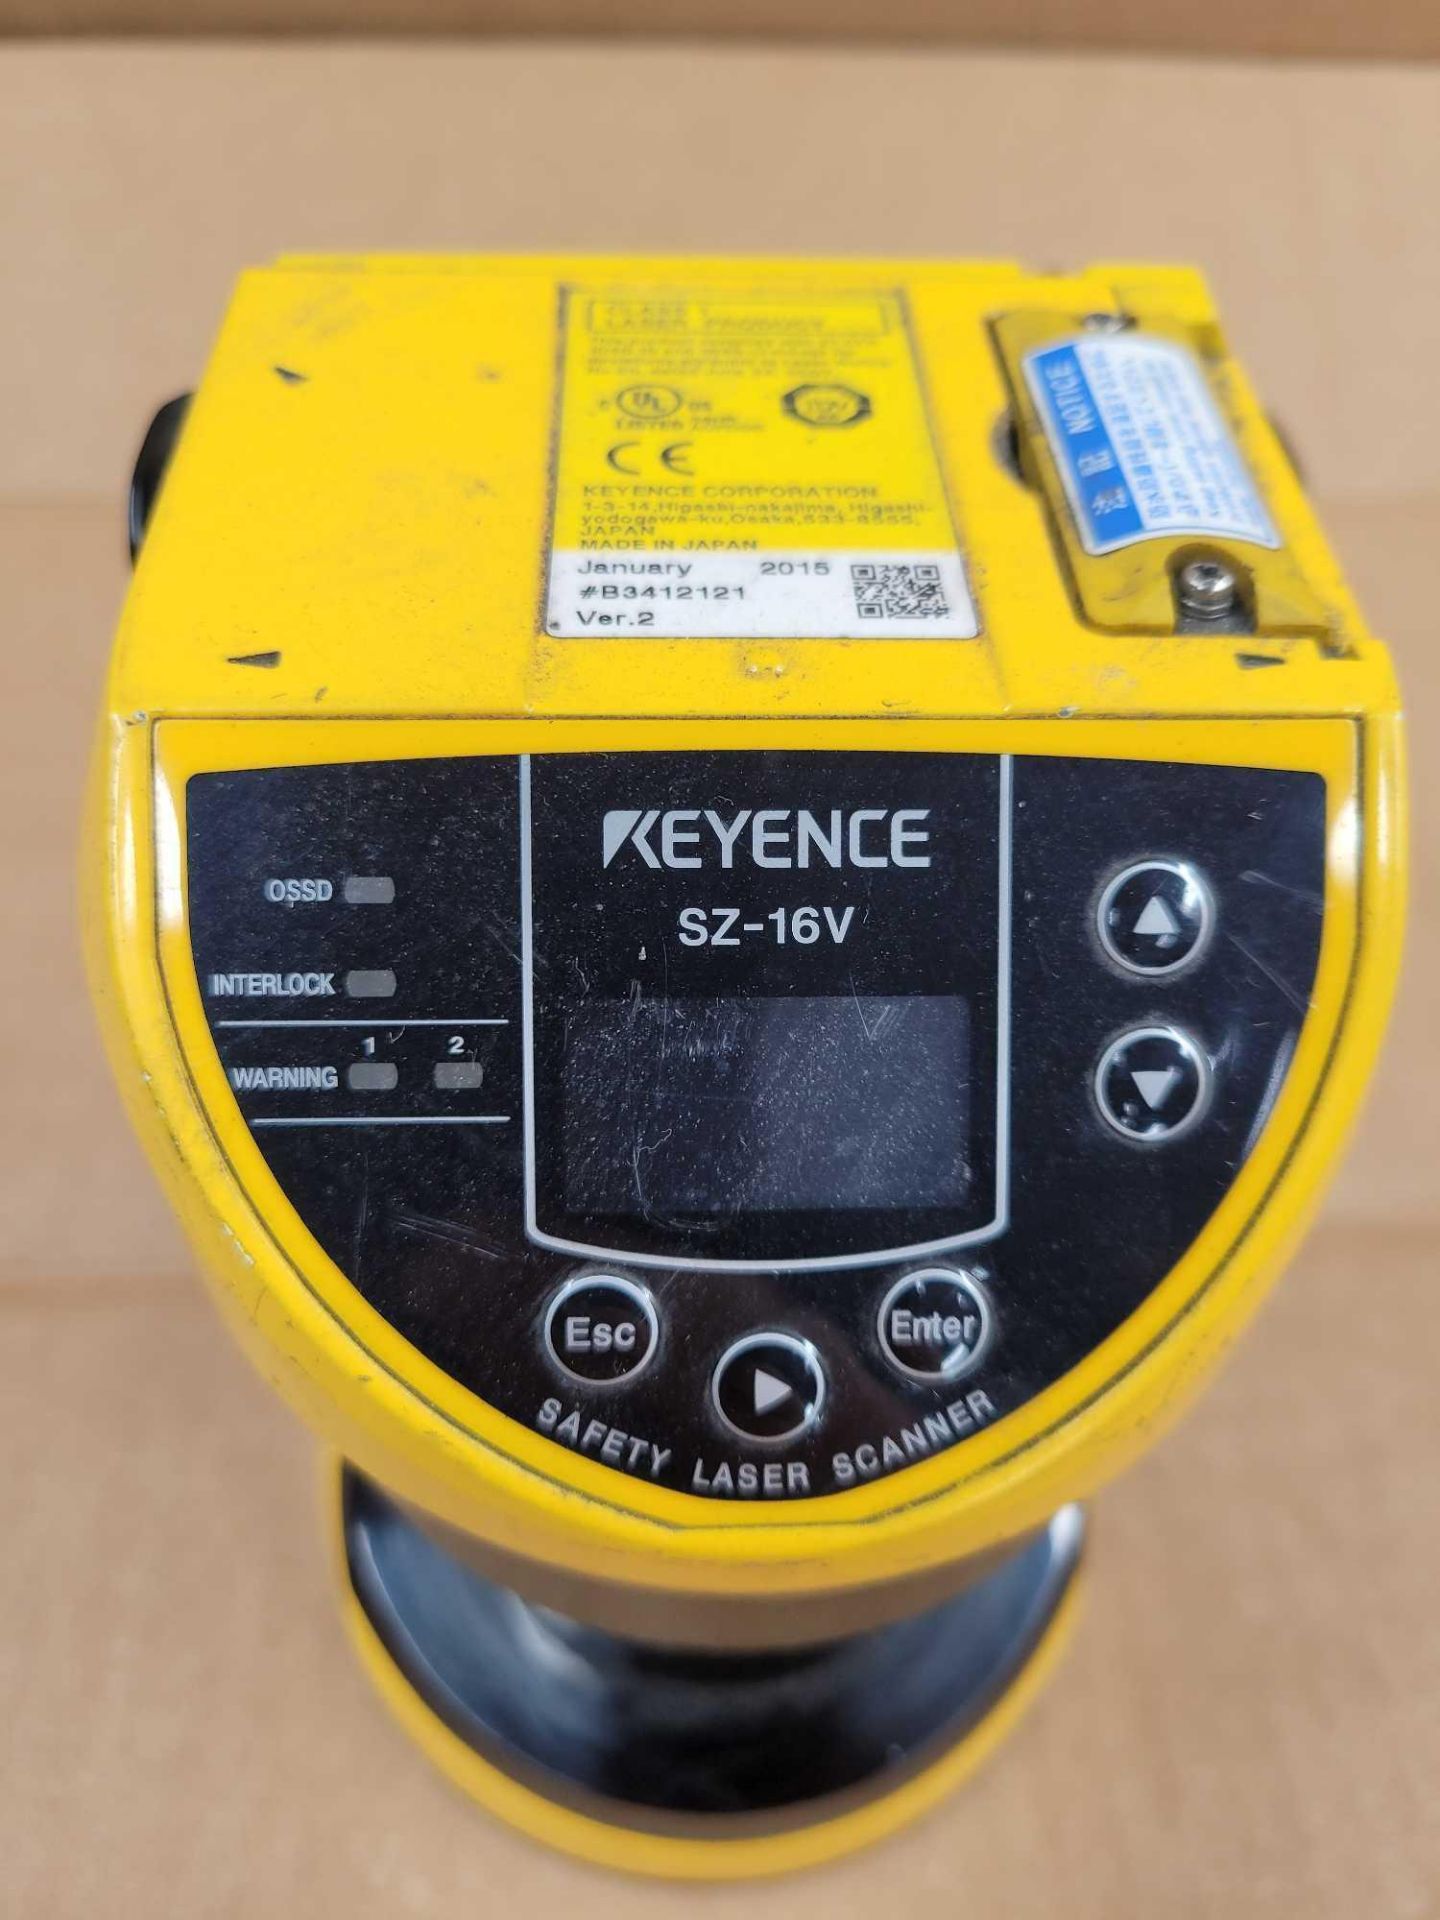 KEYENCE SZ-16V / Safety Laser Scanner  /  Lot Weight: 4.0 lbs - Image 2 of 7